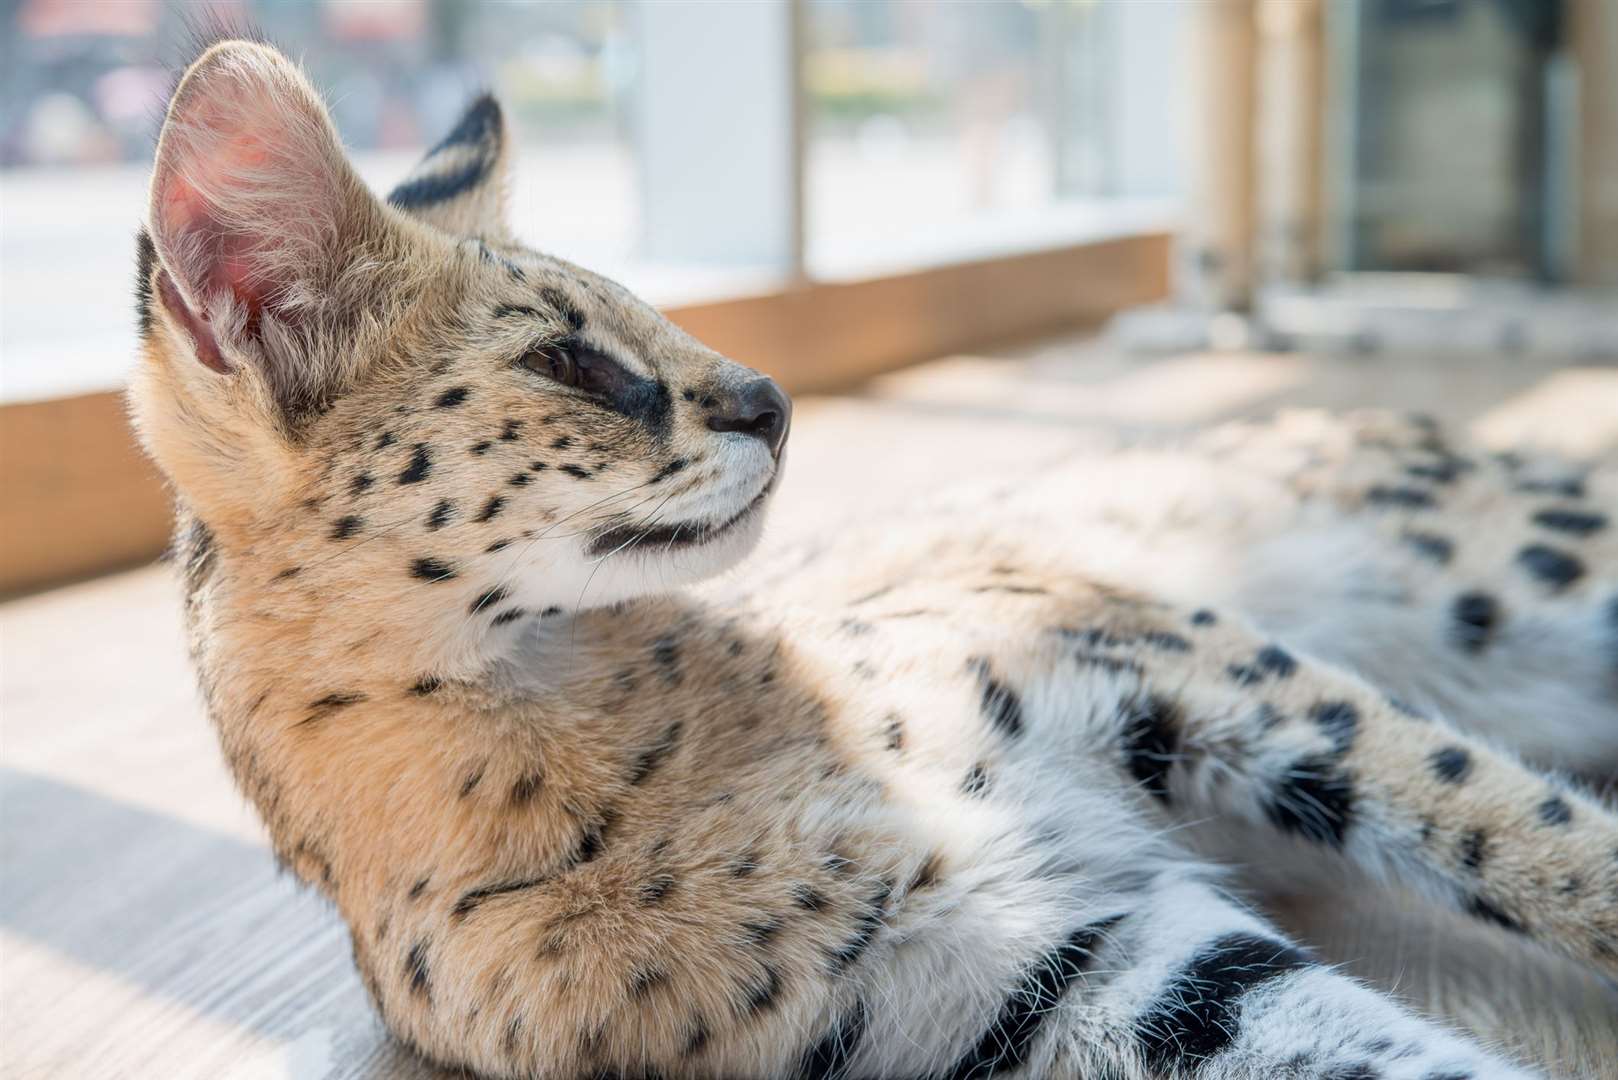 8 Savannah Cats are owned by people in Kent Picture: Born Free, iStock